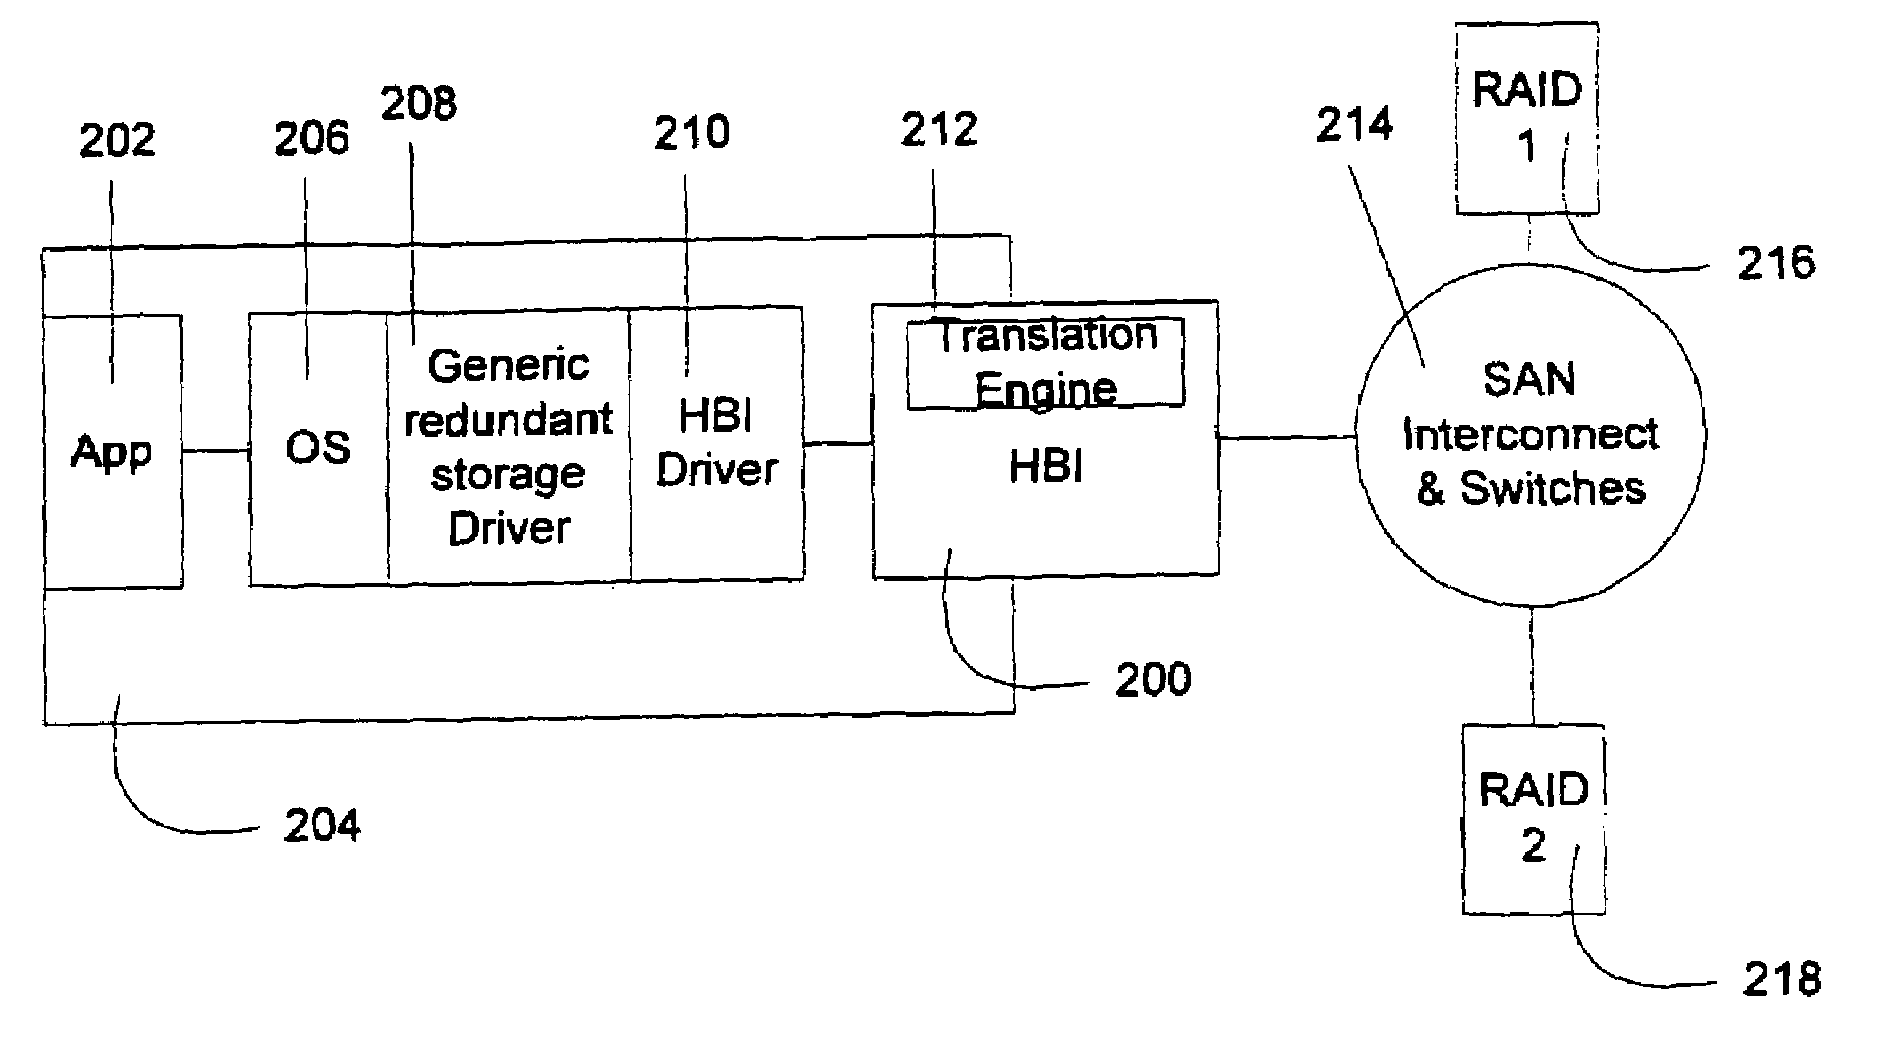 Translating device adapter having a common command set for interfacing multiple types of redundant storage devices to a host processor